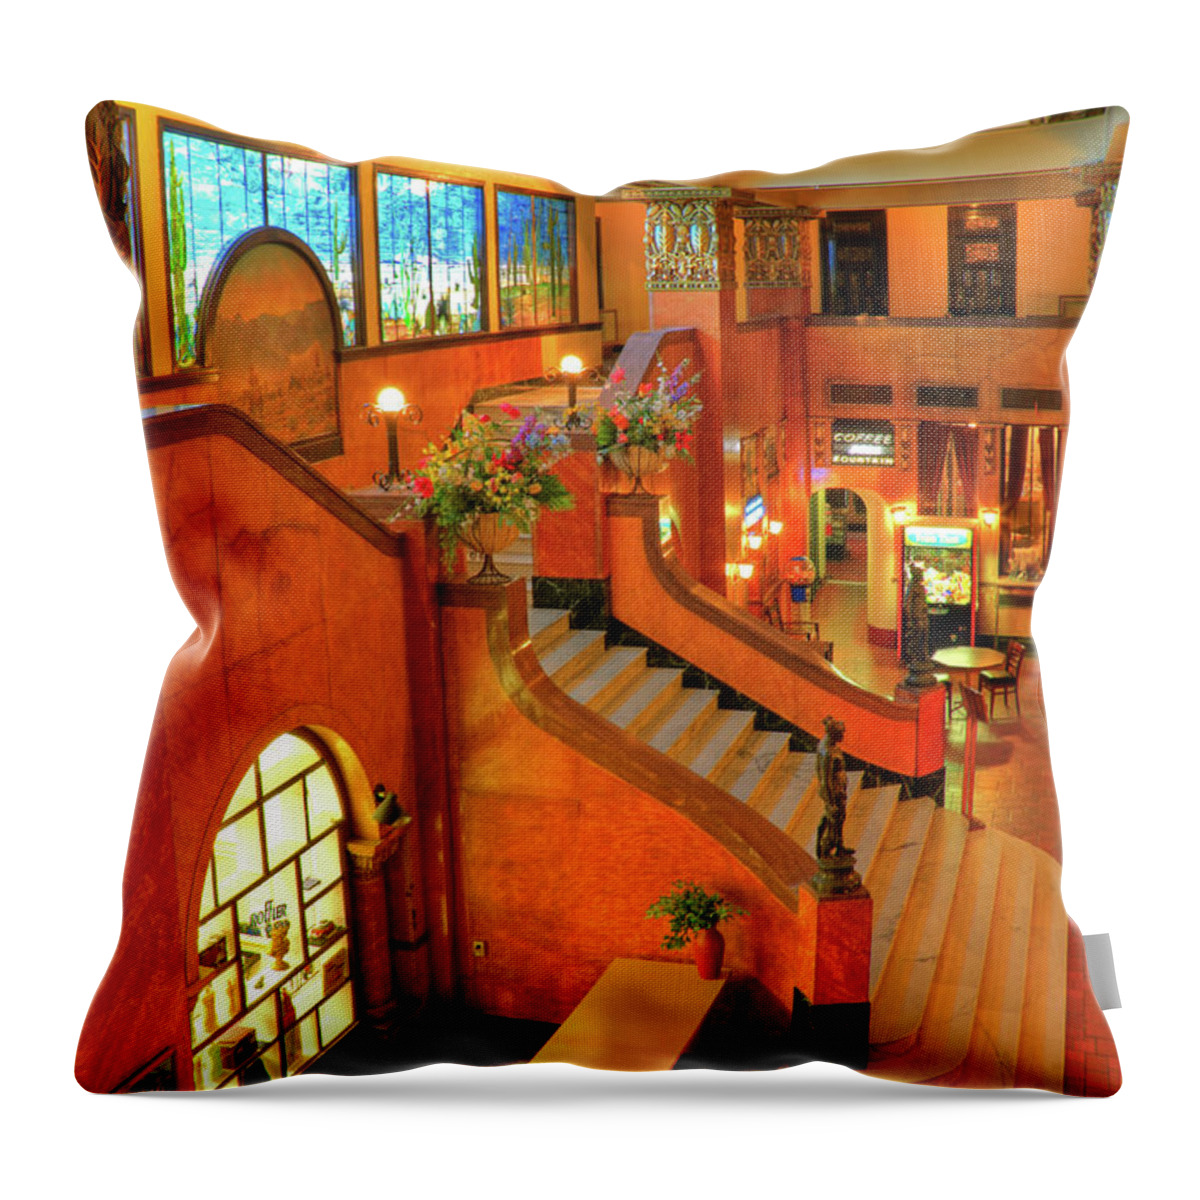 Gadsden Hotel Throw Pillow featuring the photograph The Gadsden Hotel in Douglas Arizona by Charlene Mitchell